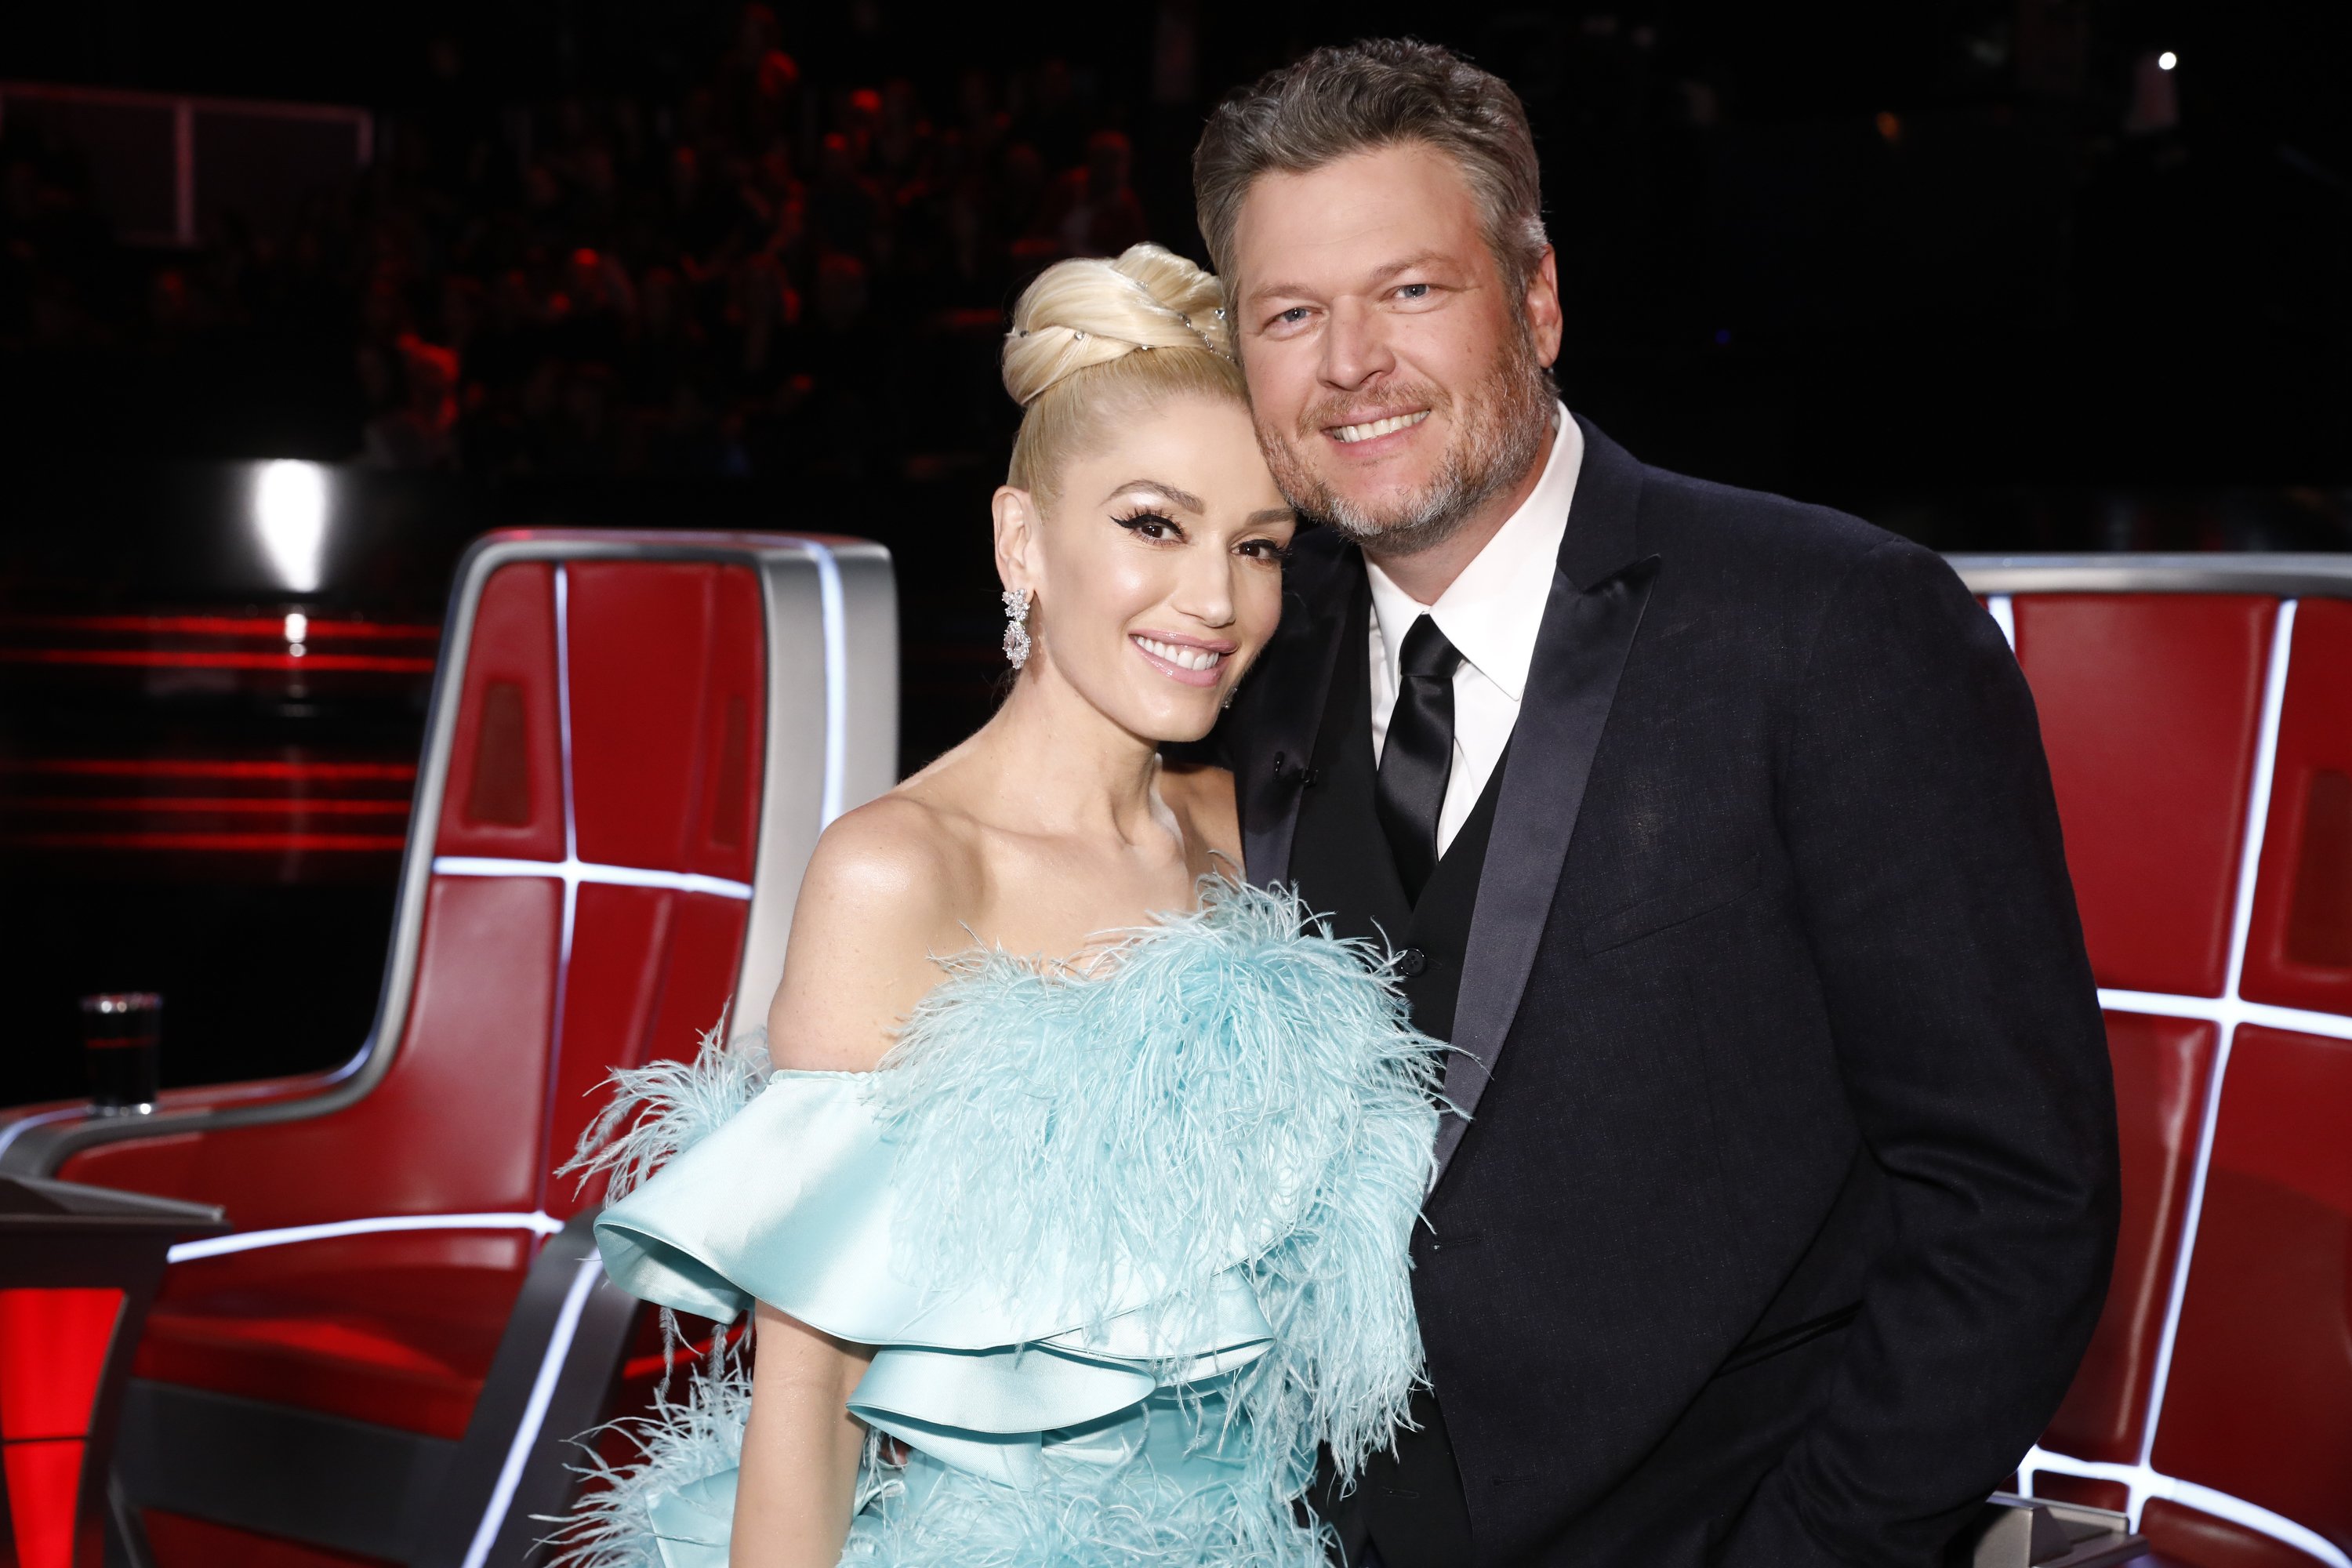 Blake Shelton and Gwen Stefani during the finale of season 17 of "The Voice." | Source: Getty Images.